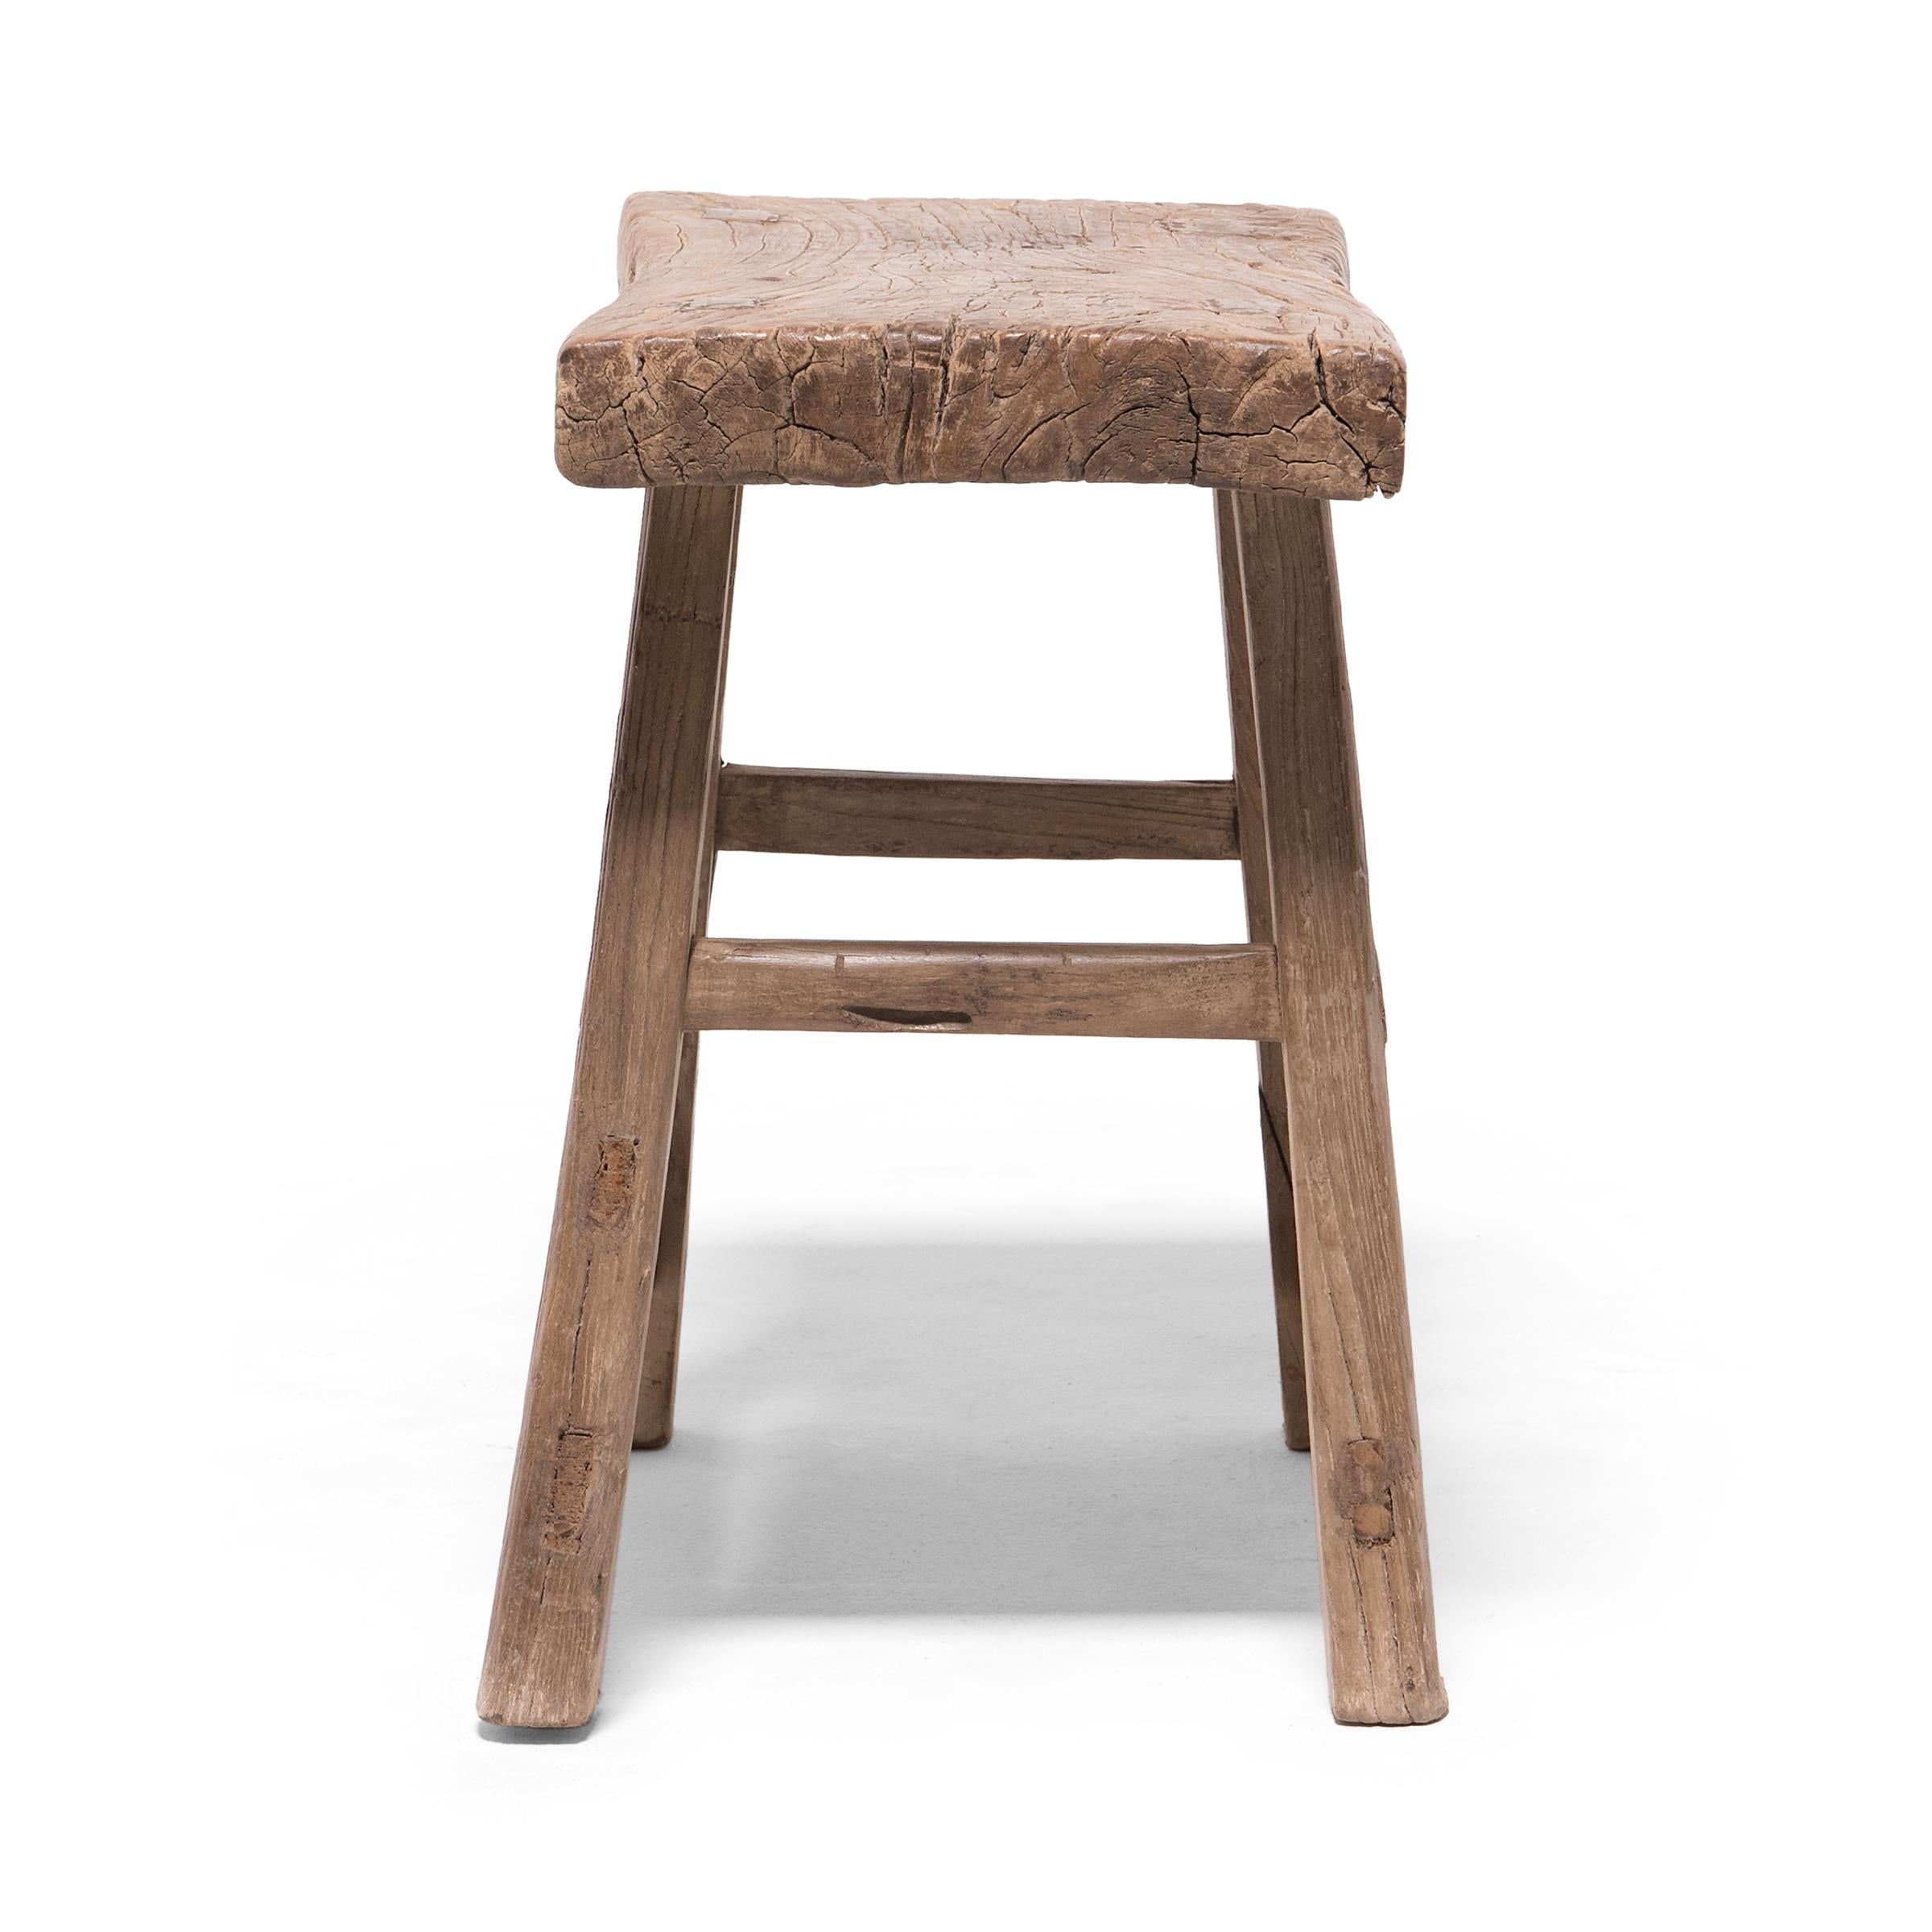 Rustic Provincial Chinese River Stool, c. 1900